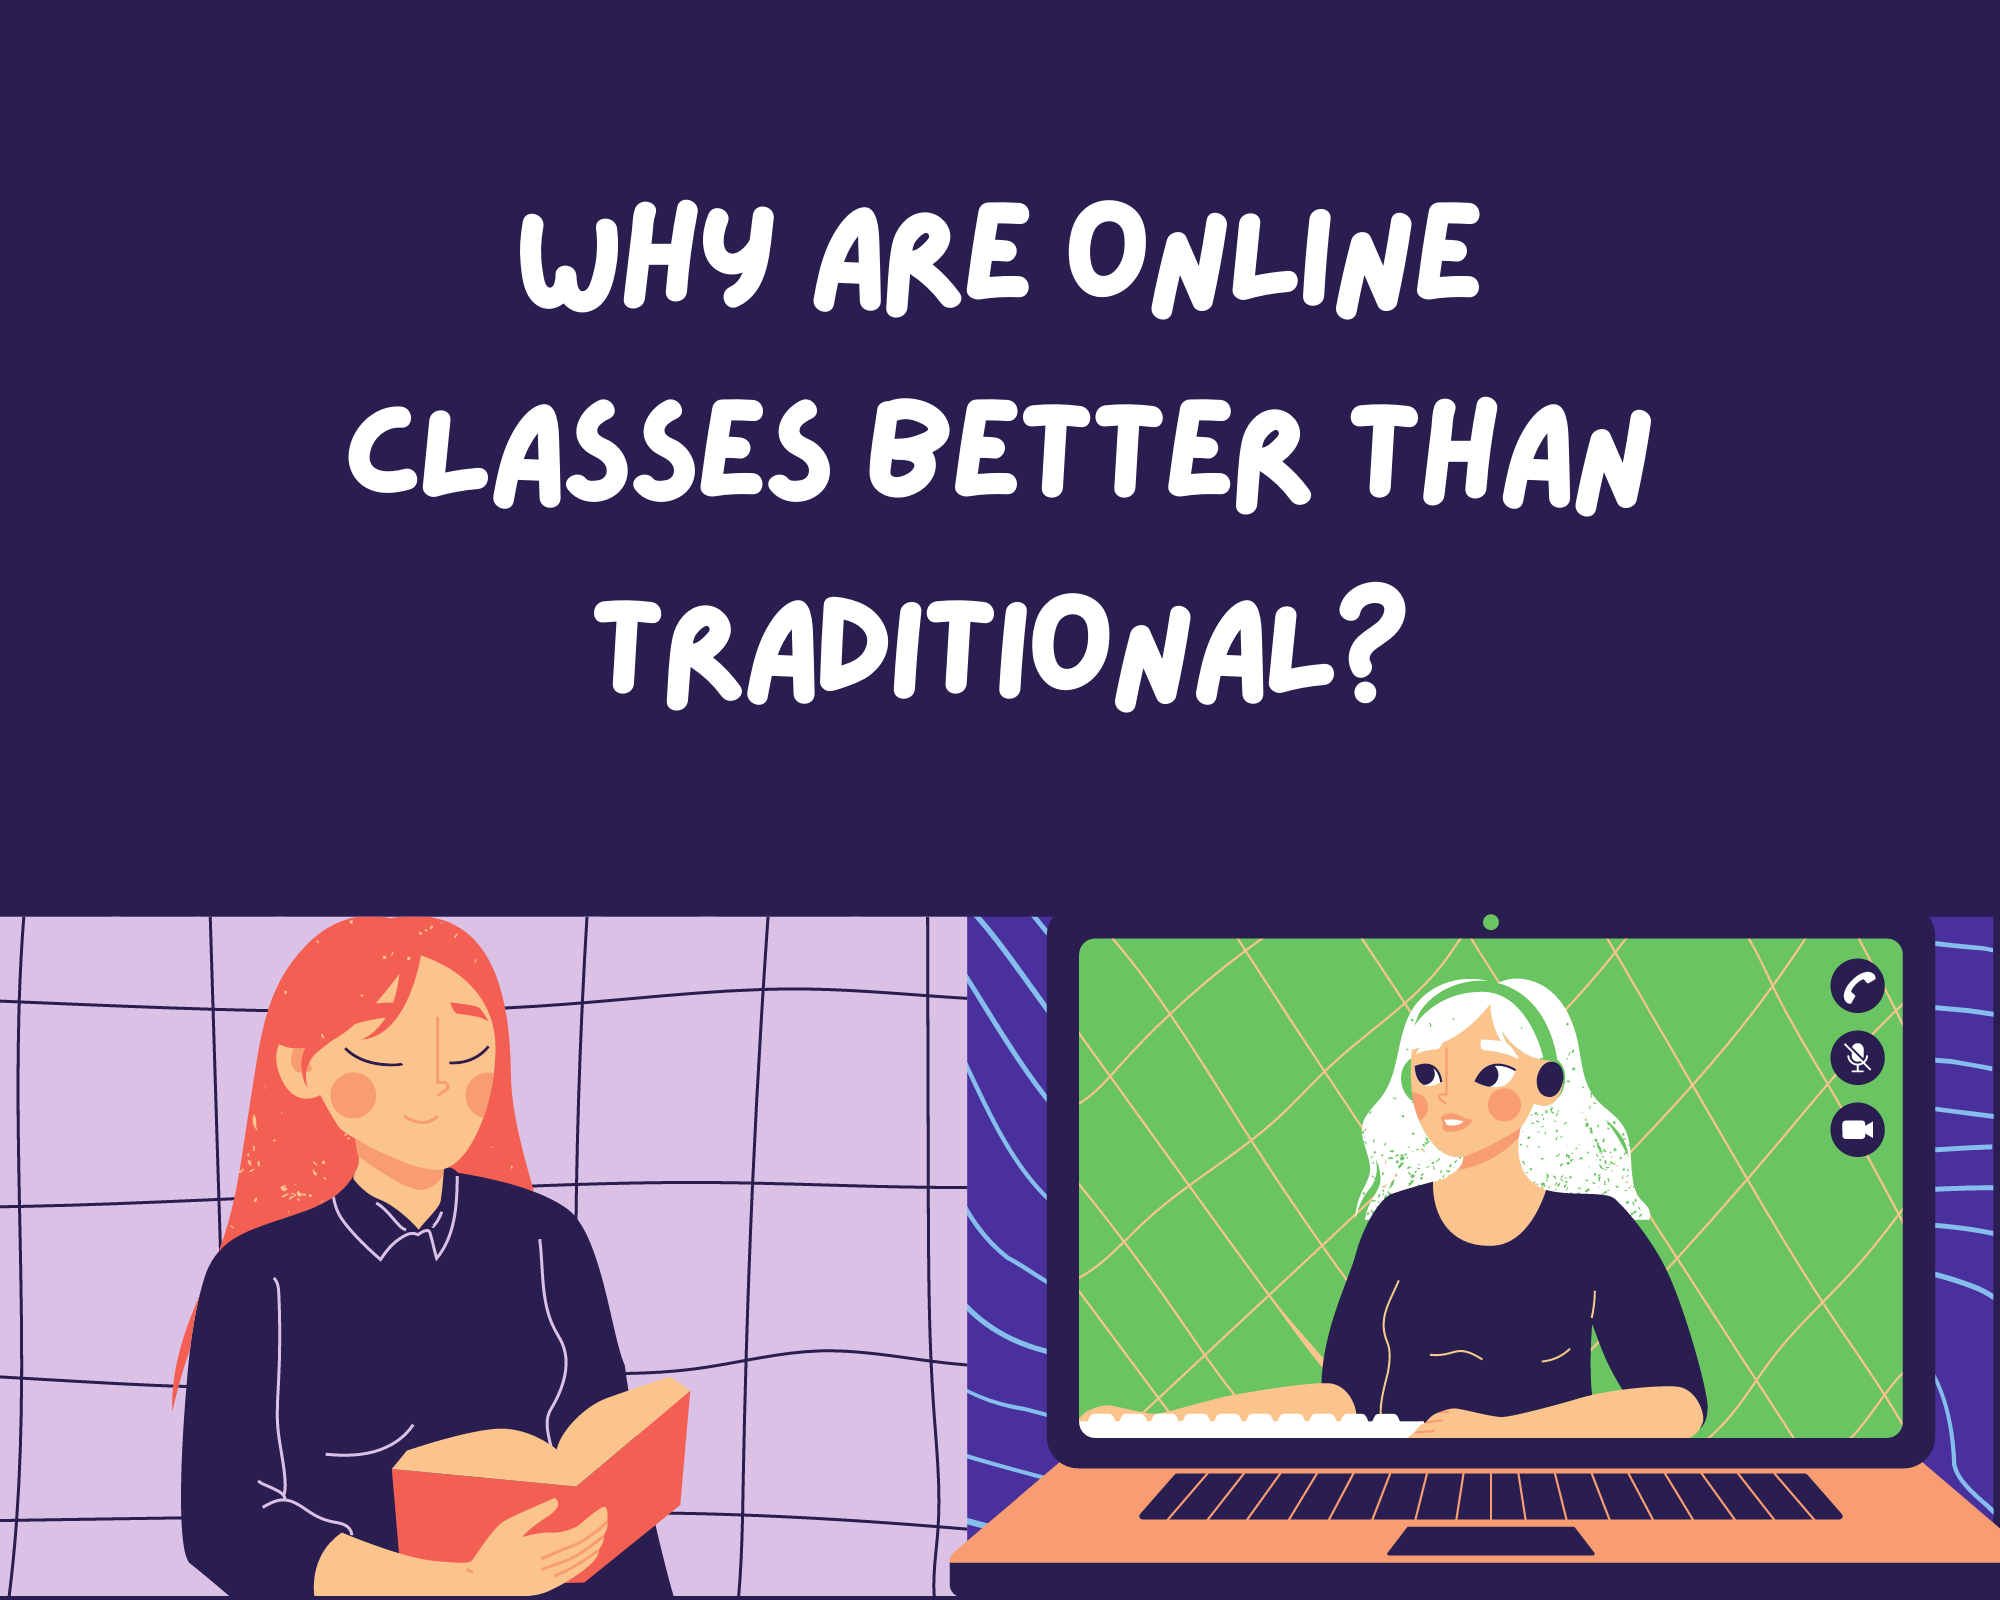 Why are Online Classes Better than Traditional?